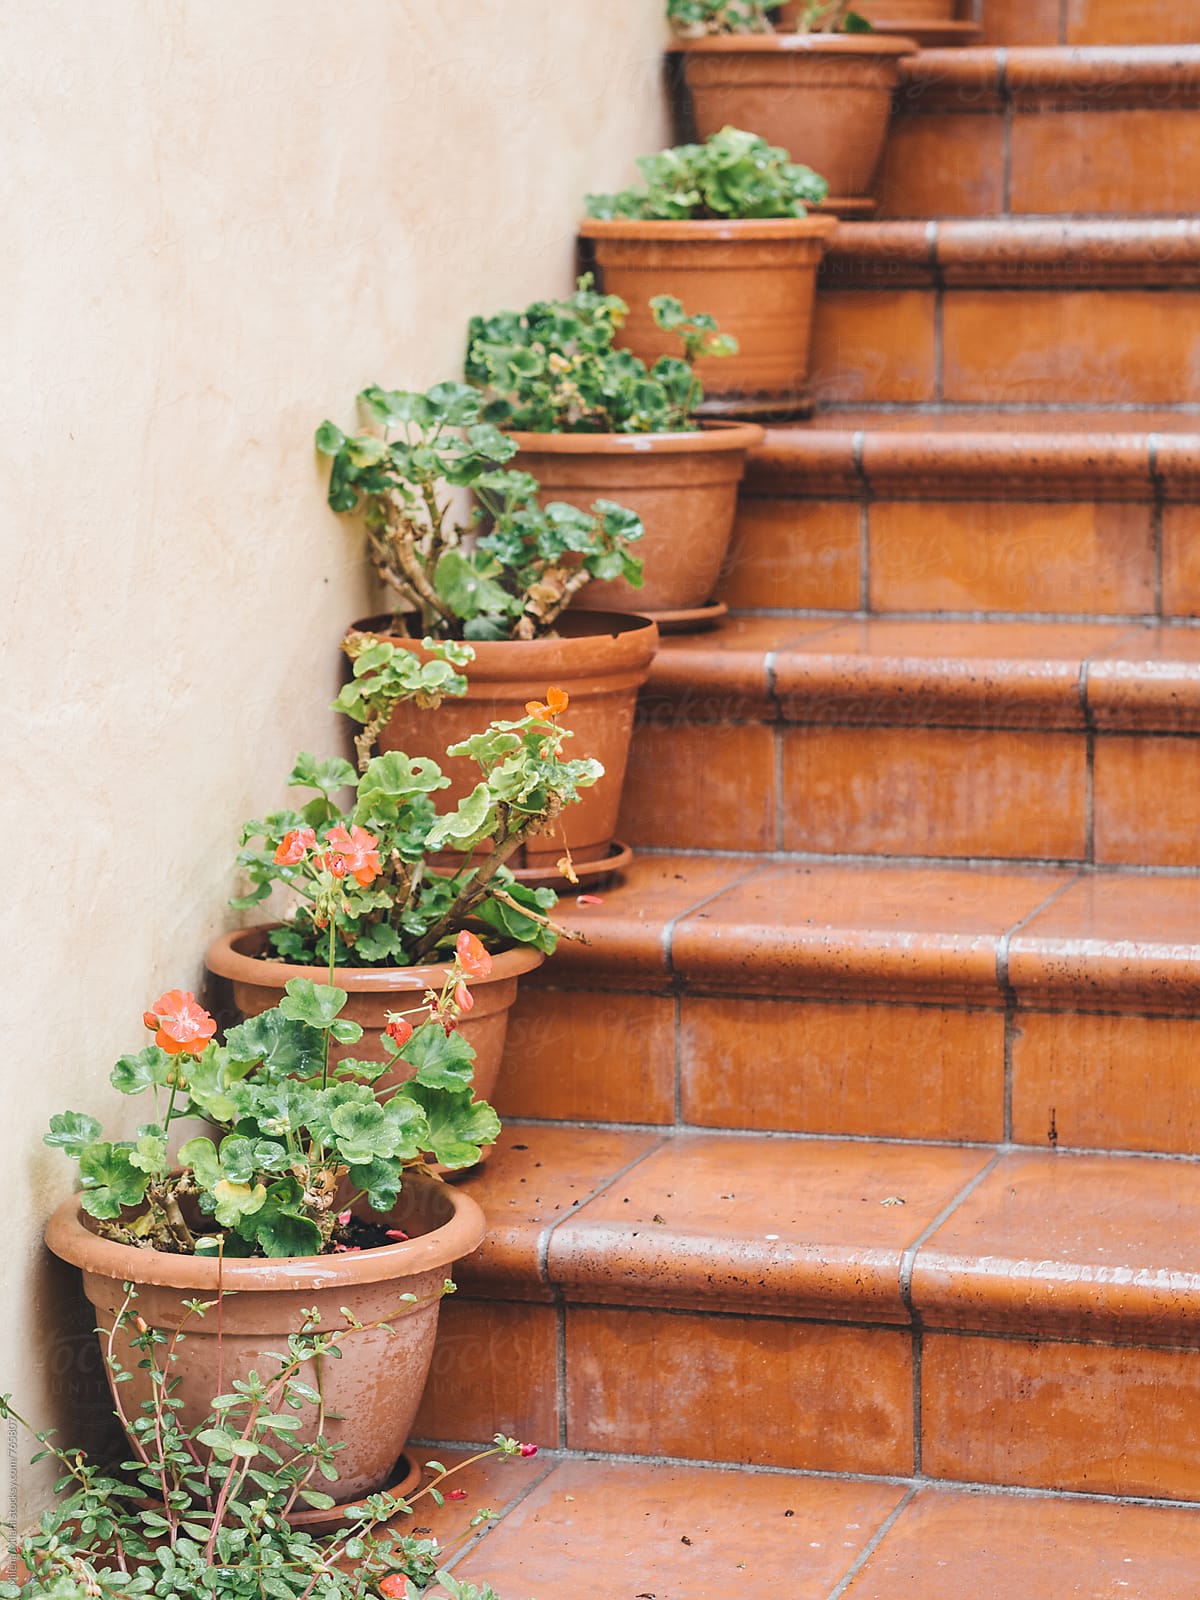 Flower pots on the stairs